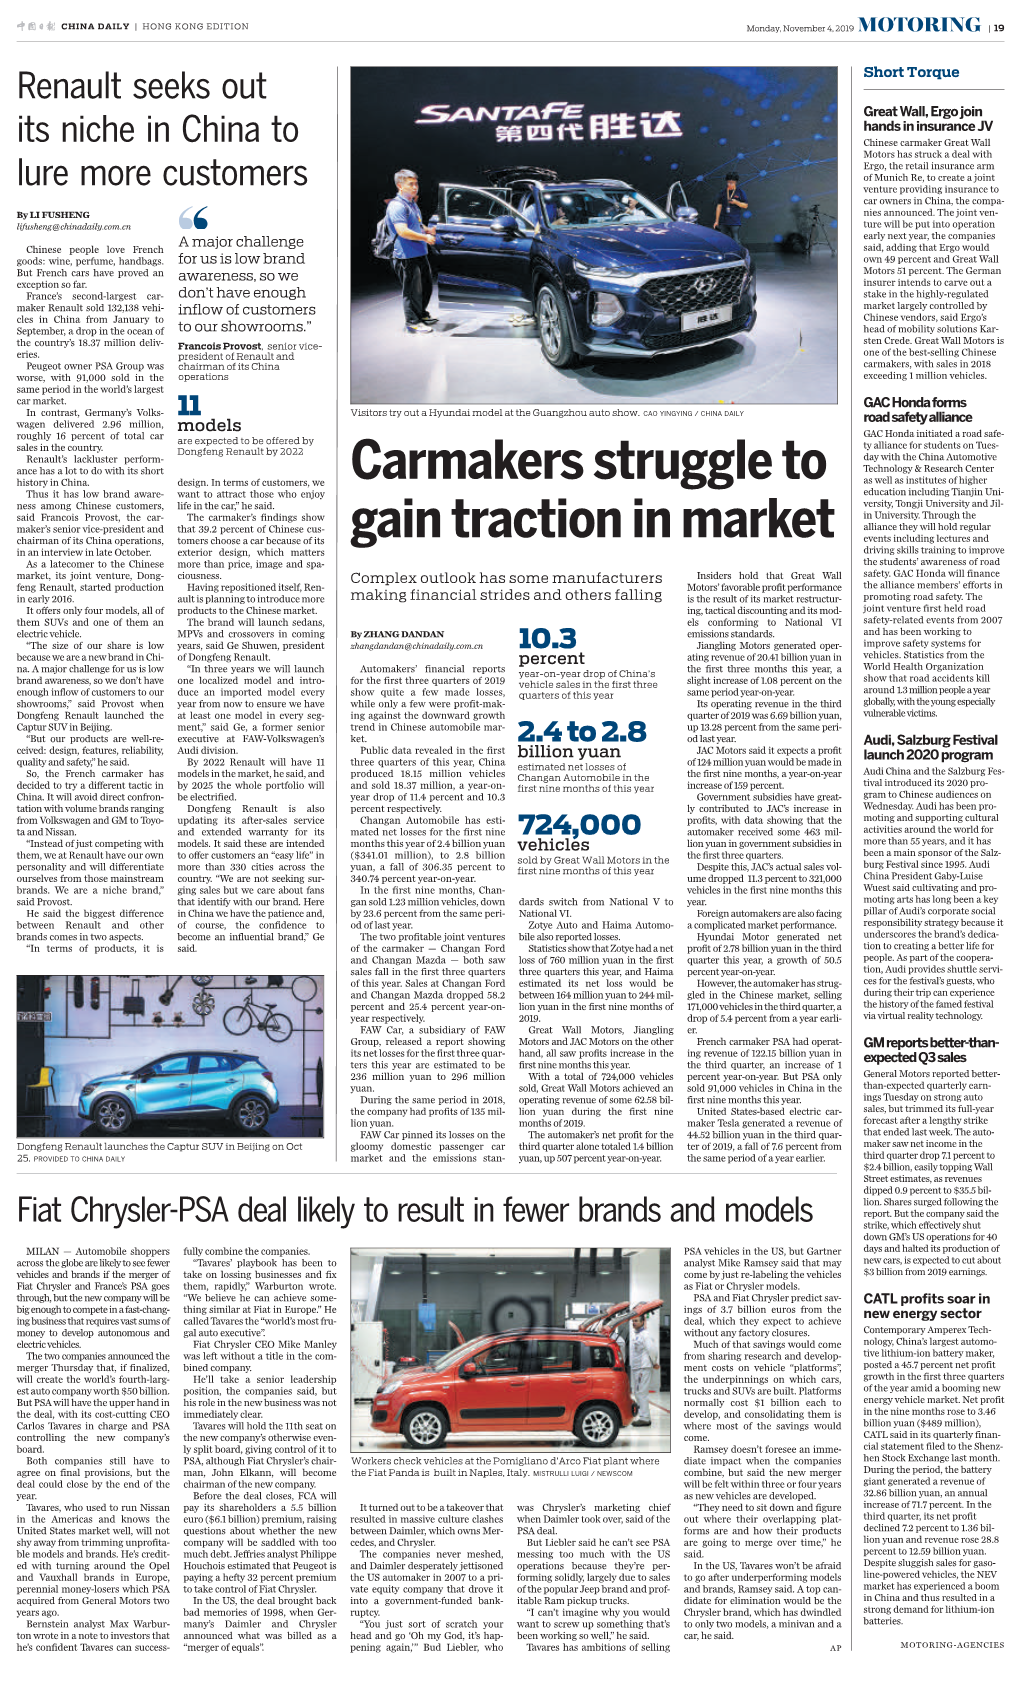 Carmakers Struggle to Gain Traction in Market